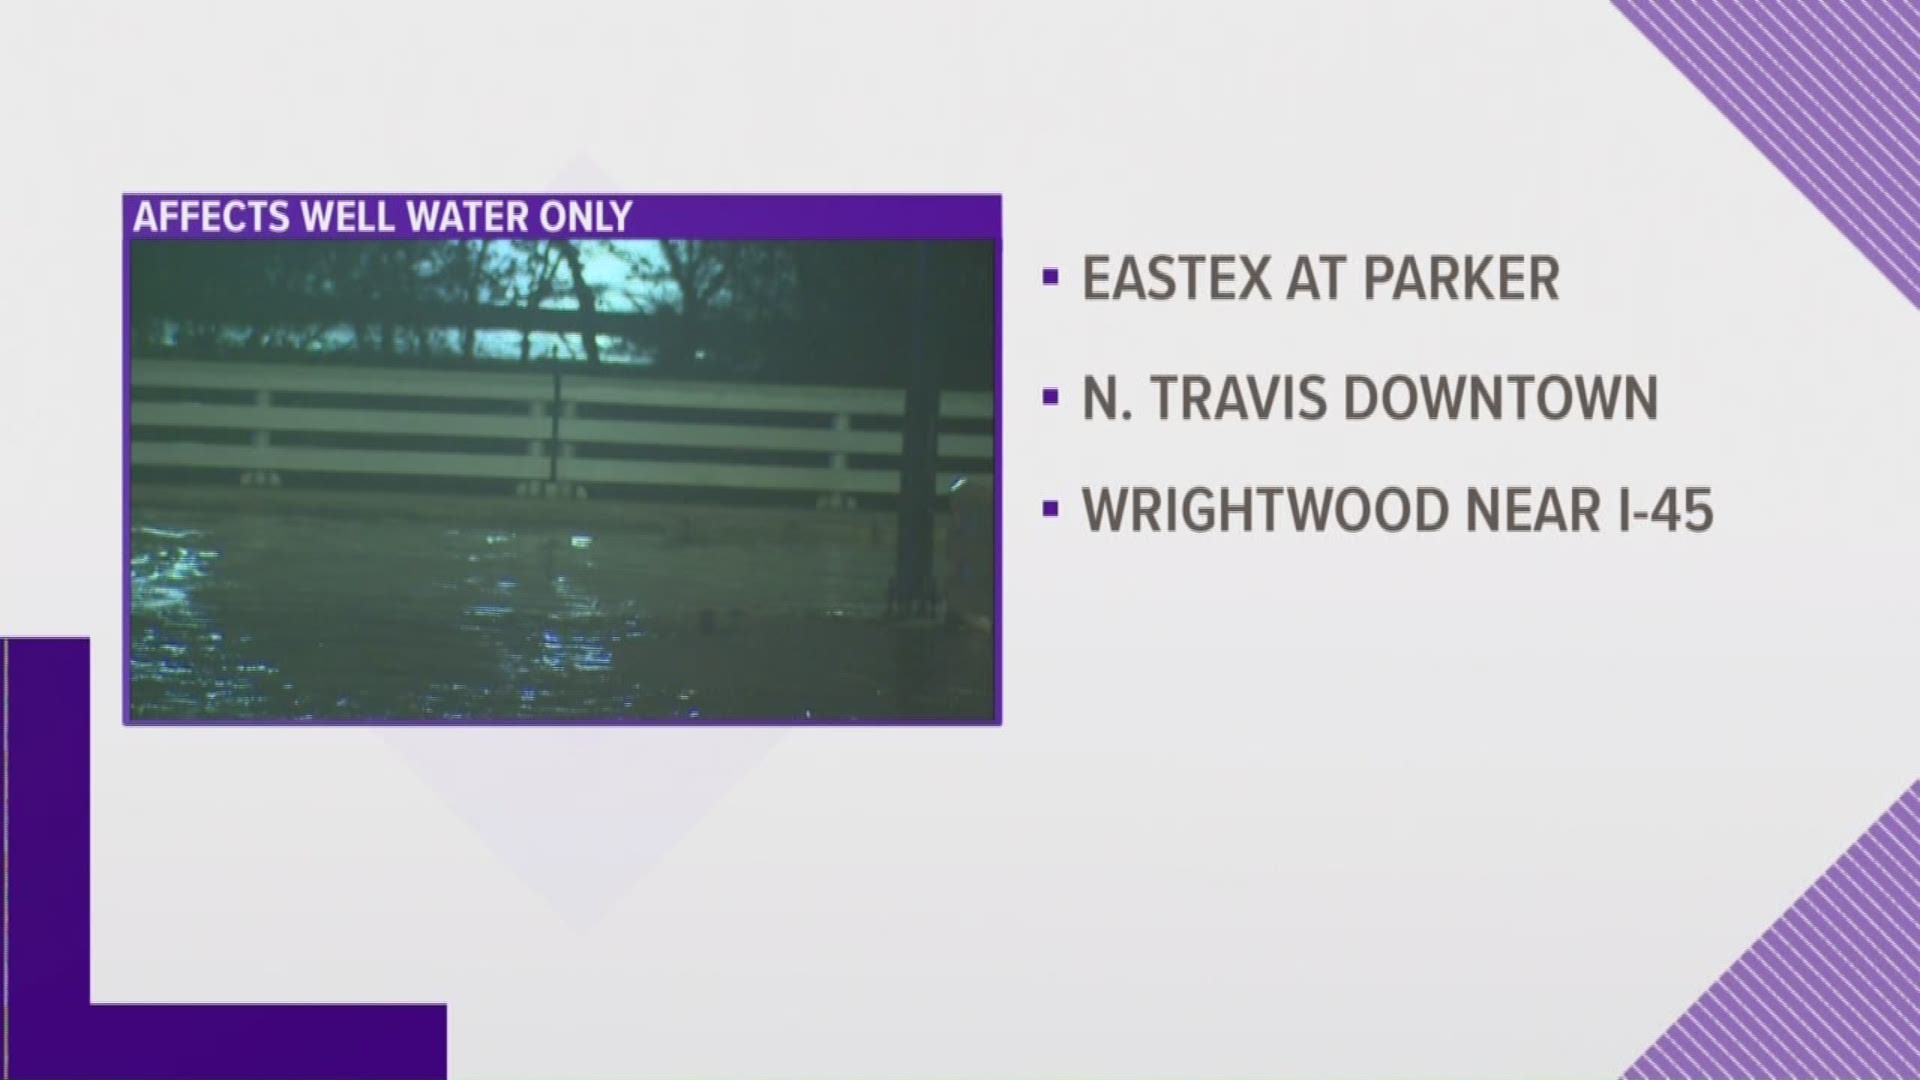 We received new word from the city of Houston on just how much raw sewage spilled over into Houston's bayous on Friday night.